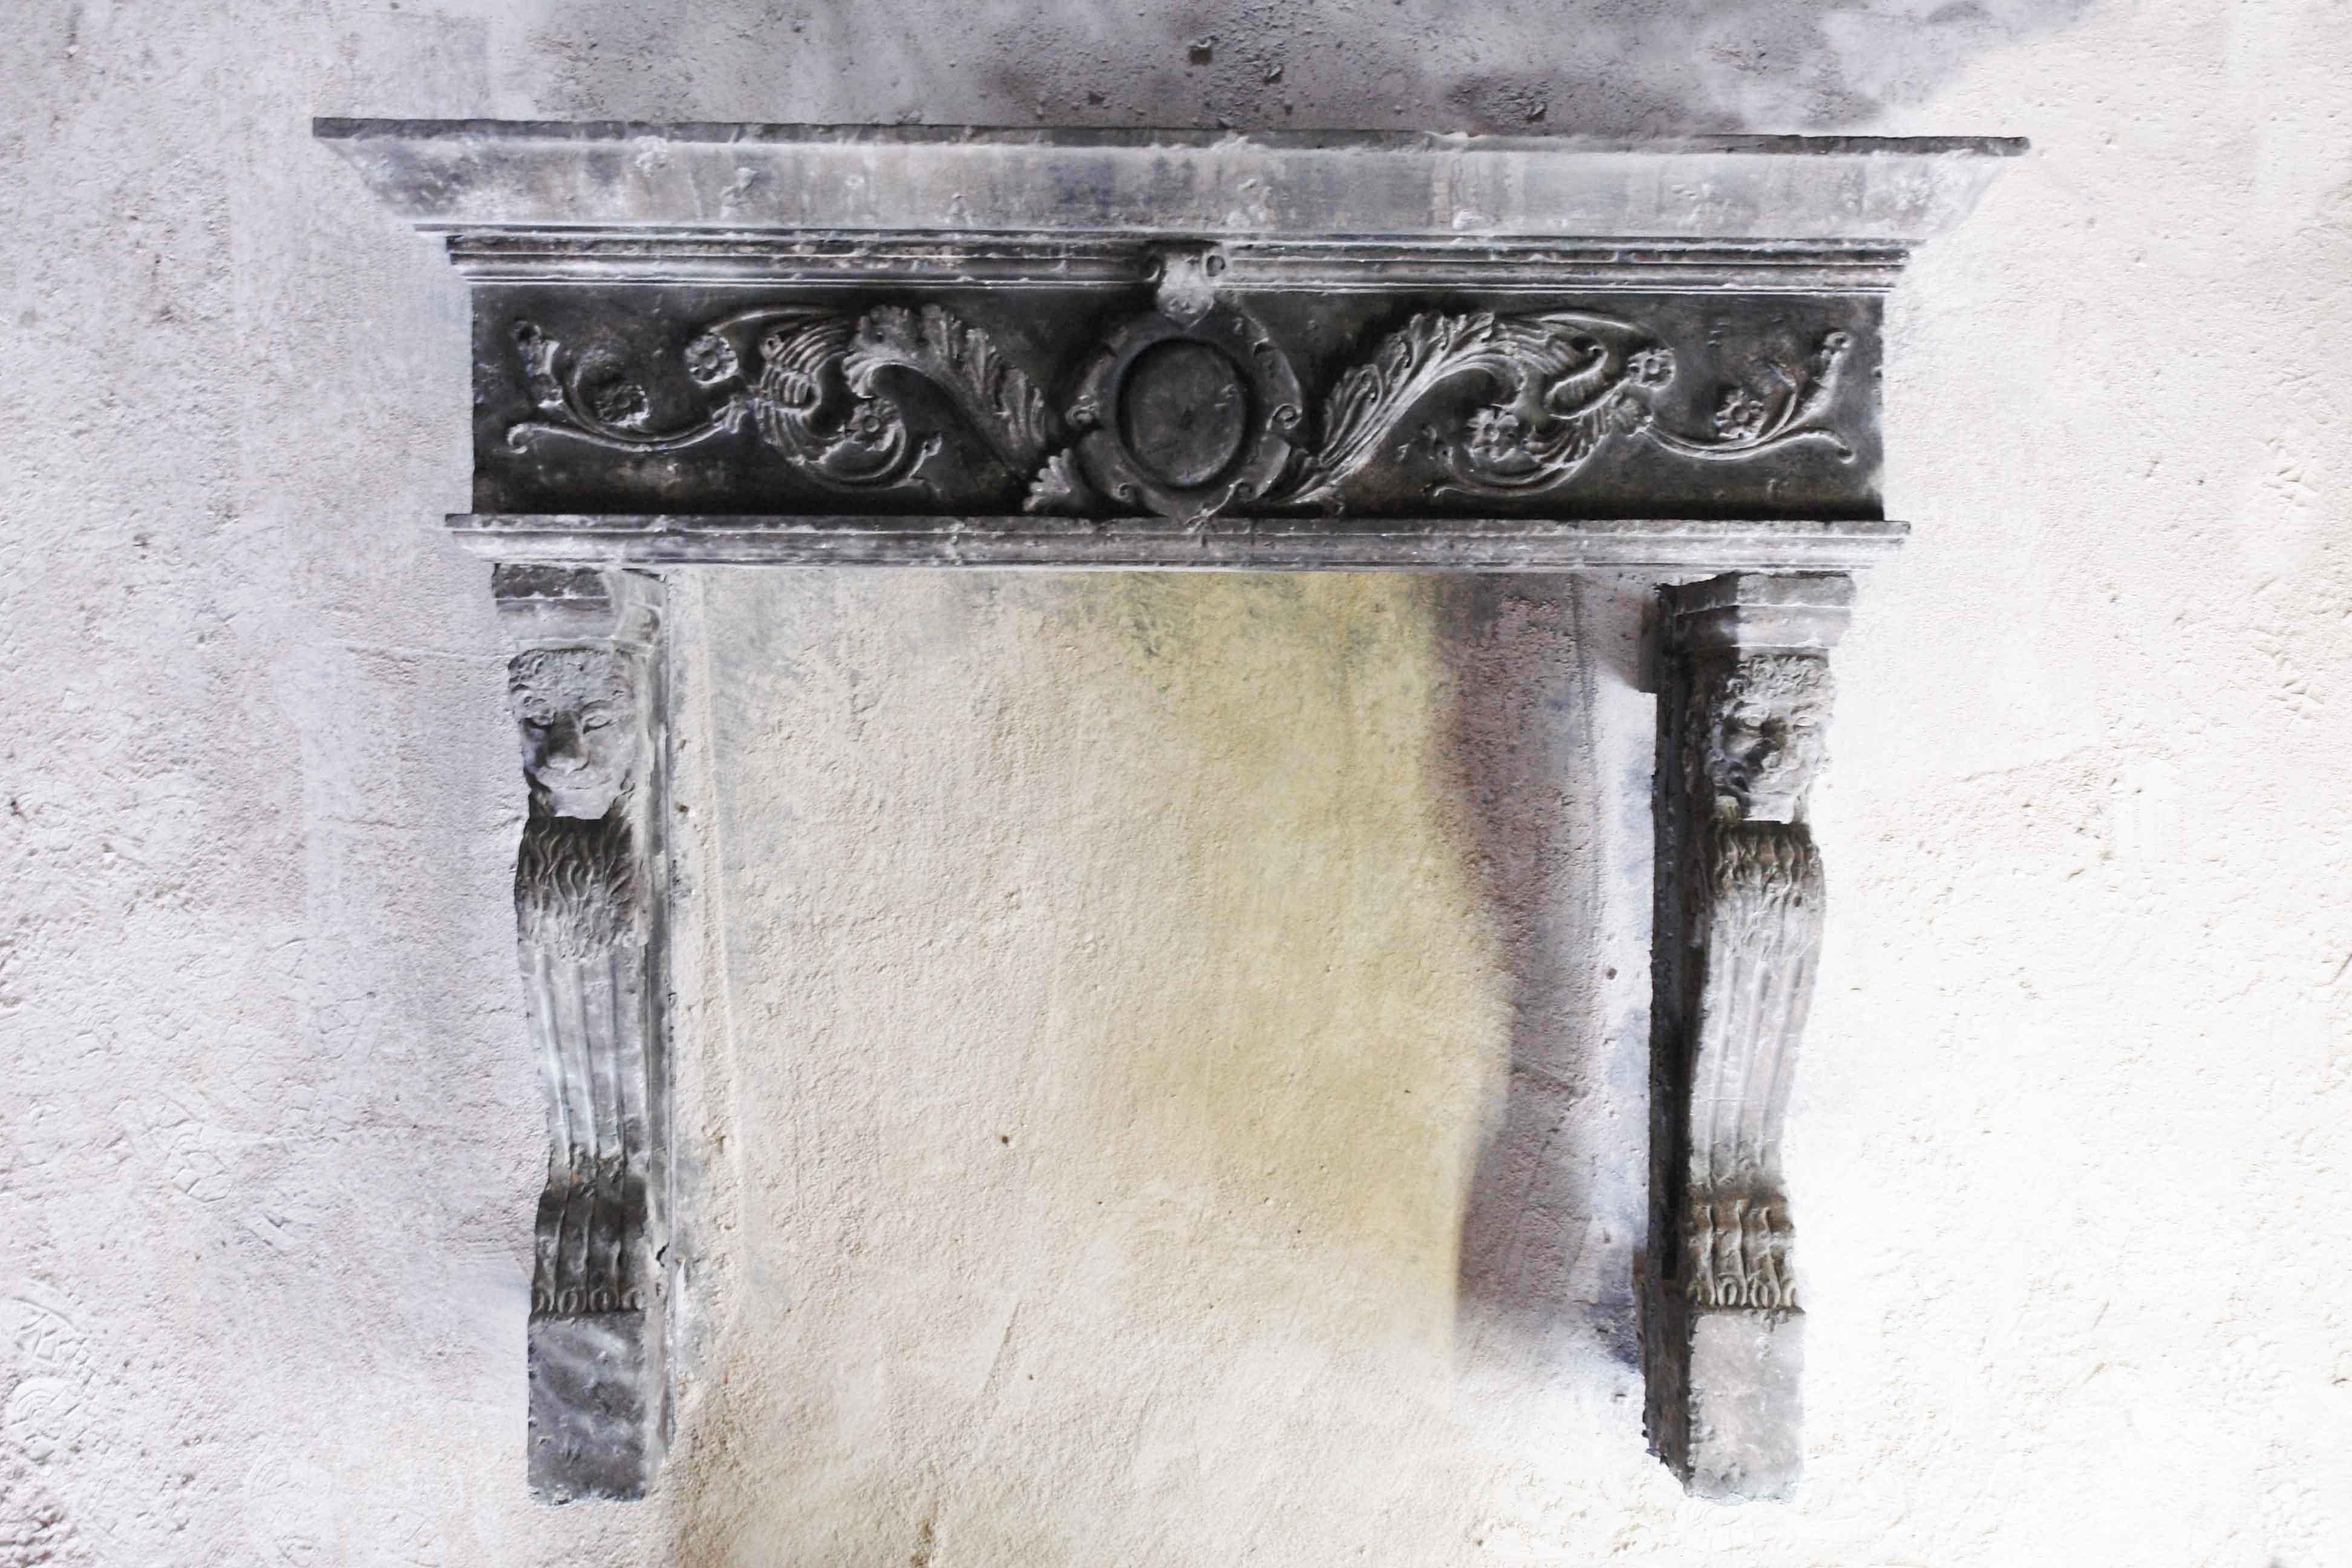 Art work with tradition, Italian Renaissance style fireplace with Lions heads on legs, hand-carved in pure limestone with tradition, hand-finishing and patina in excellent quality.
Acanthus leaves, medallion and details of sculptures very detailed,